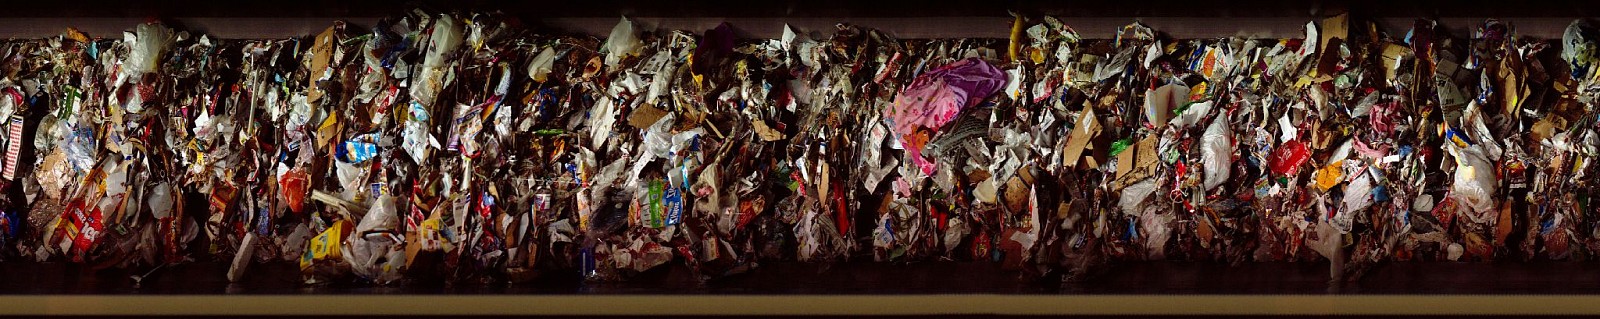 Jay Mark Johnson, WASTE NOT WHATNOT #6, 2013 Freemont Garbage
archival pigment on paper, mounted on aluminum, 40 x 200 in. (101.6 x 508 cm)